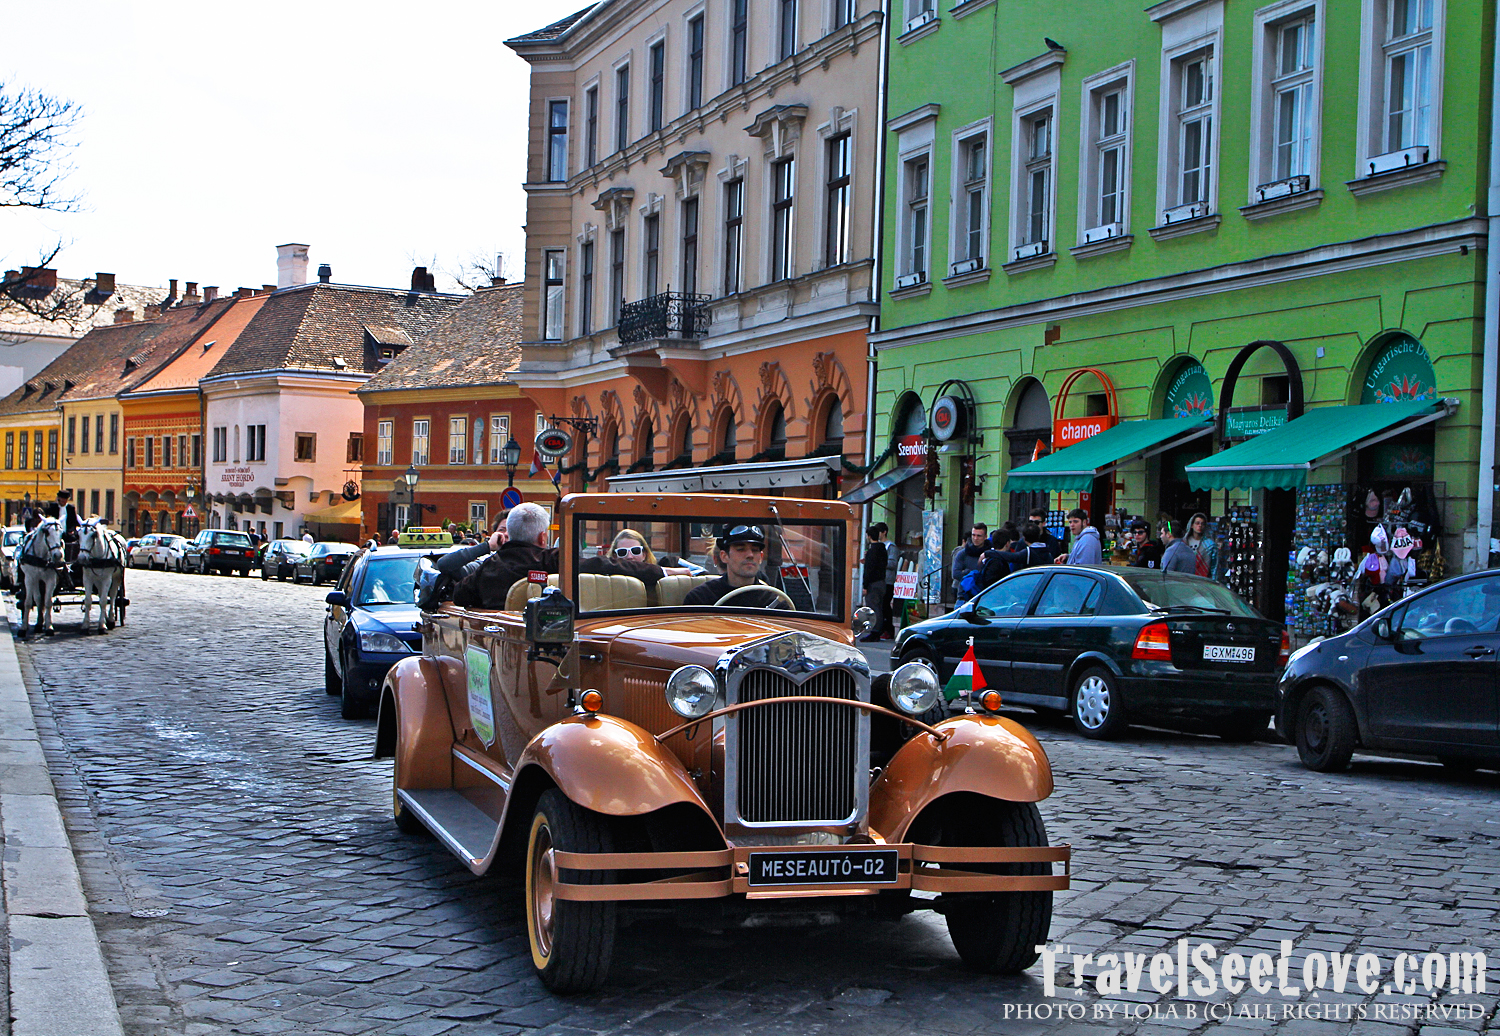 The classic cars and horse carriages definitely cemented the Old Town feel of the Buda side's city center